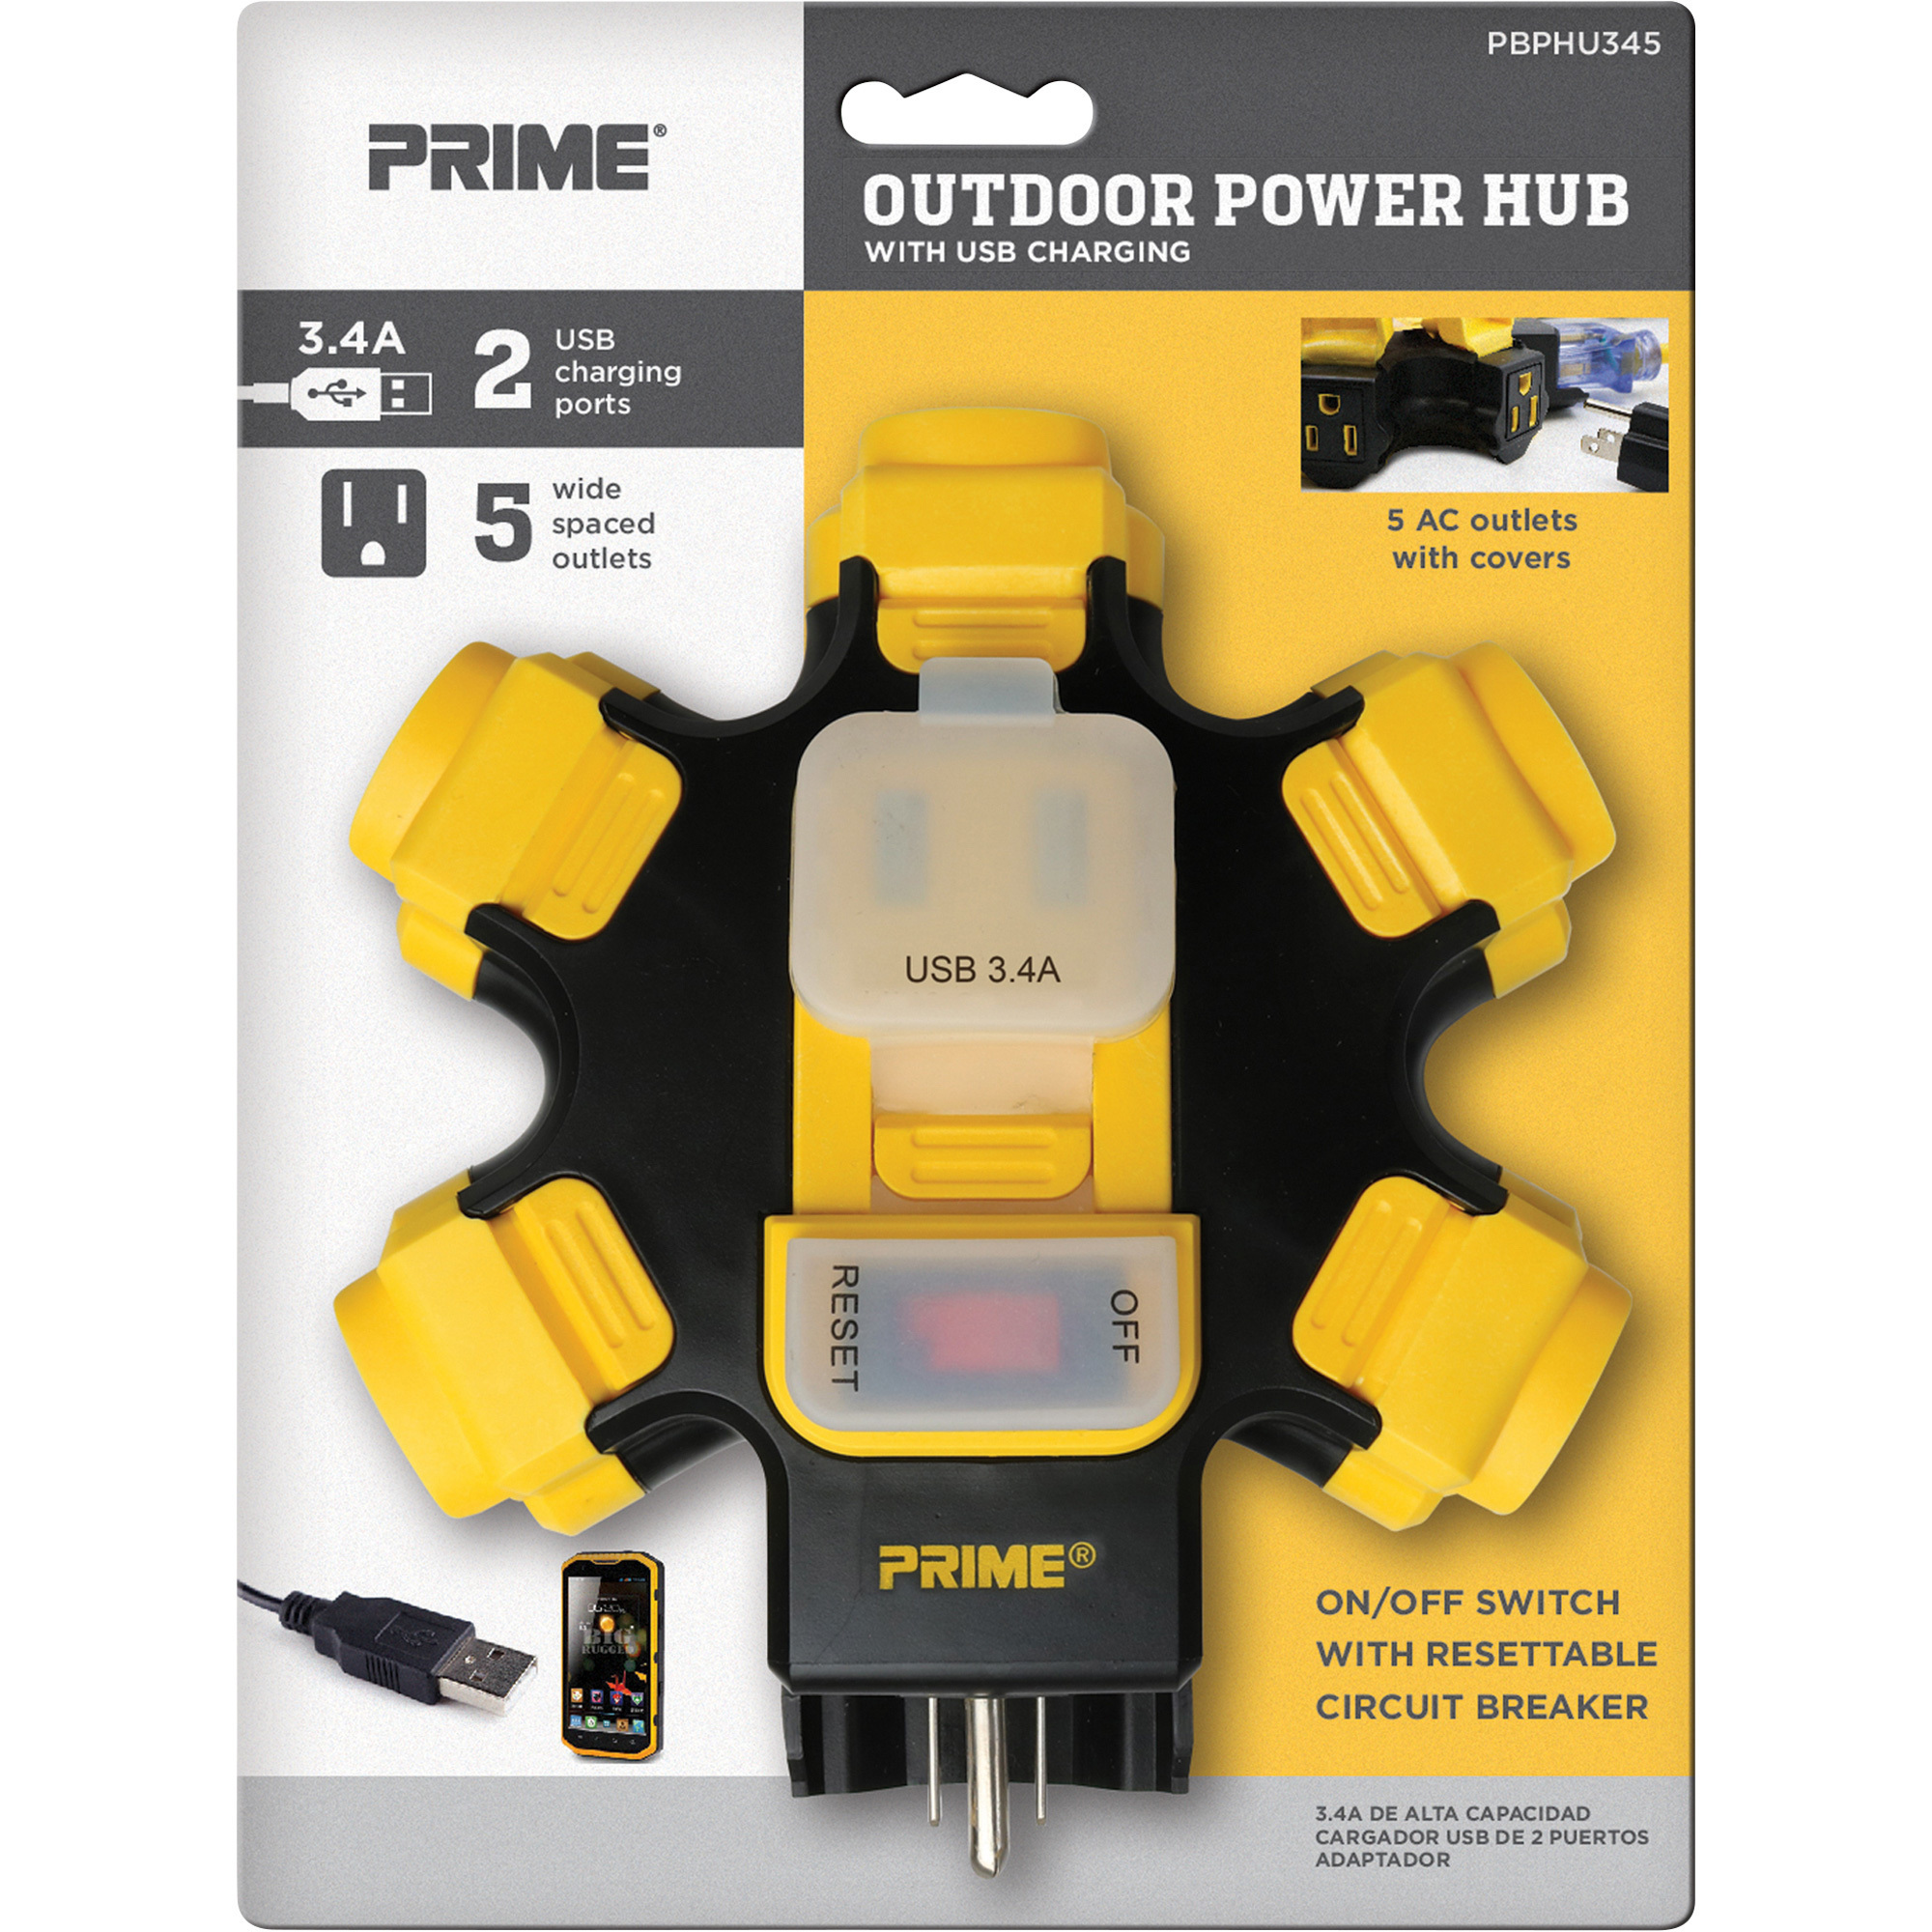 Prime Outdoor 5-Outlet Power Hub with USB Ports, Model PBPHU345